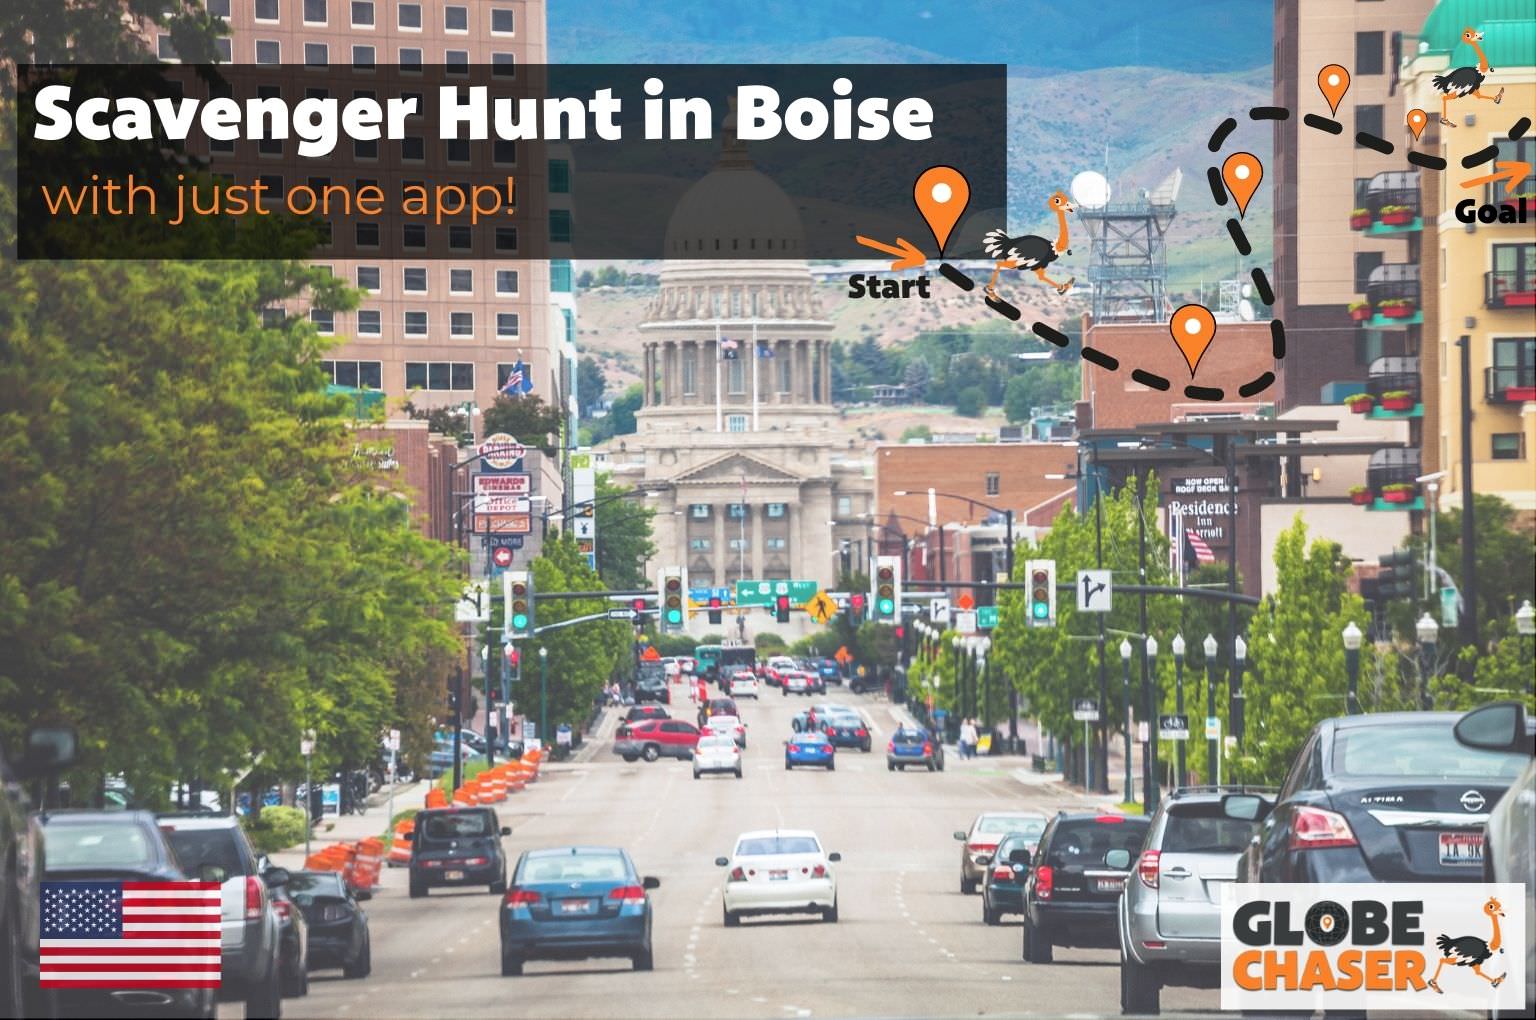 Scavenger Hunt in Boise, USA - Family Activities with the Globe Chaser App for Outdoor Fun